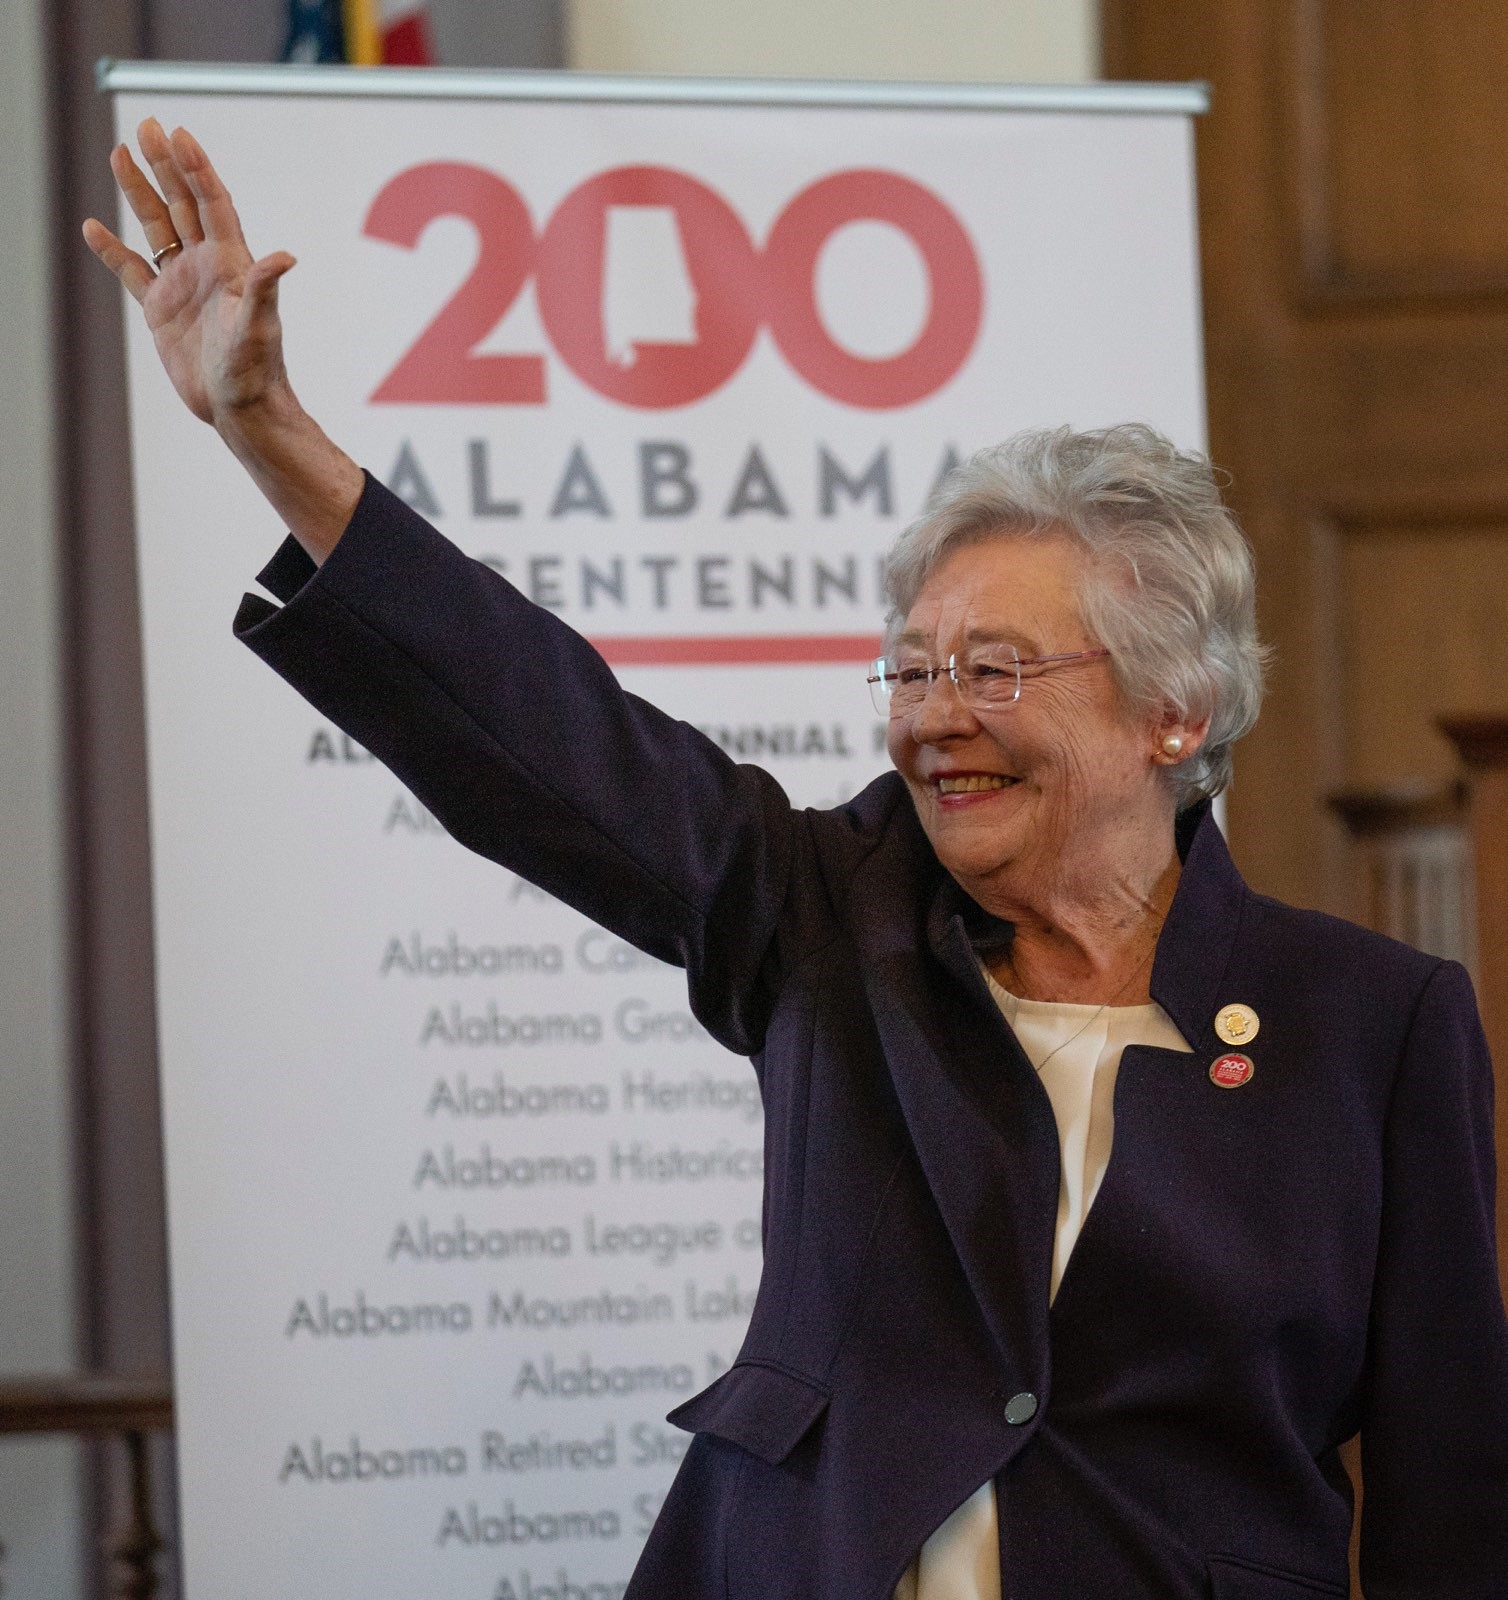 Governor Ivey Launches Year of Alabama Bicentennial